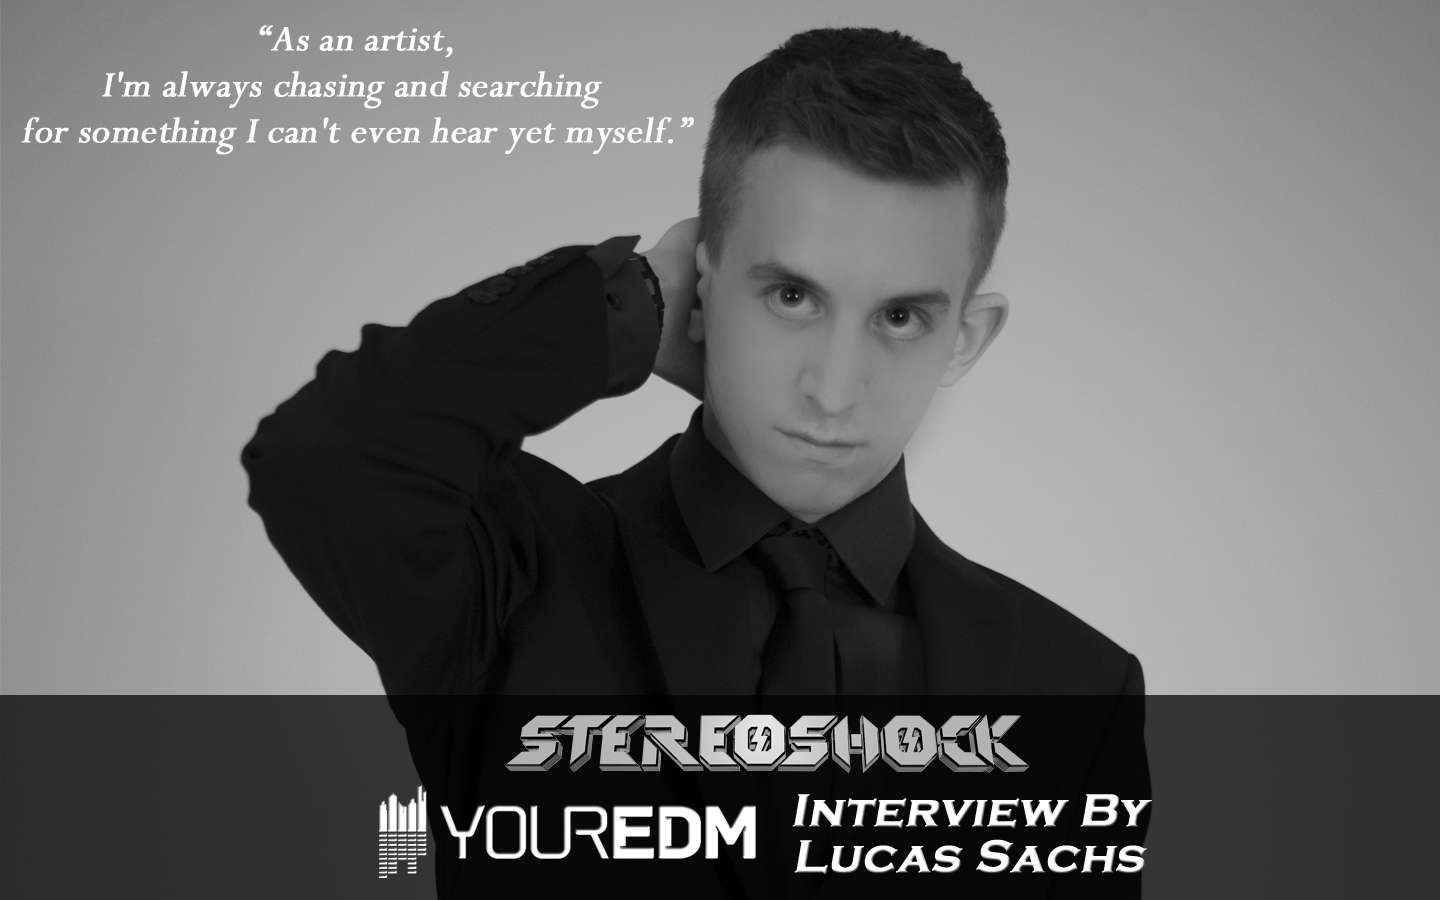 Stereoshock- YourEdm Interview Photo With Quote